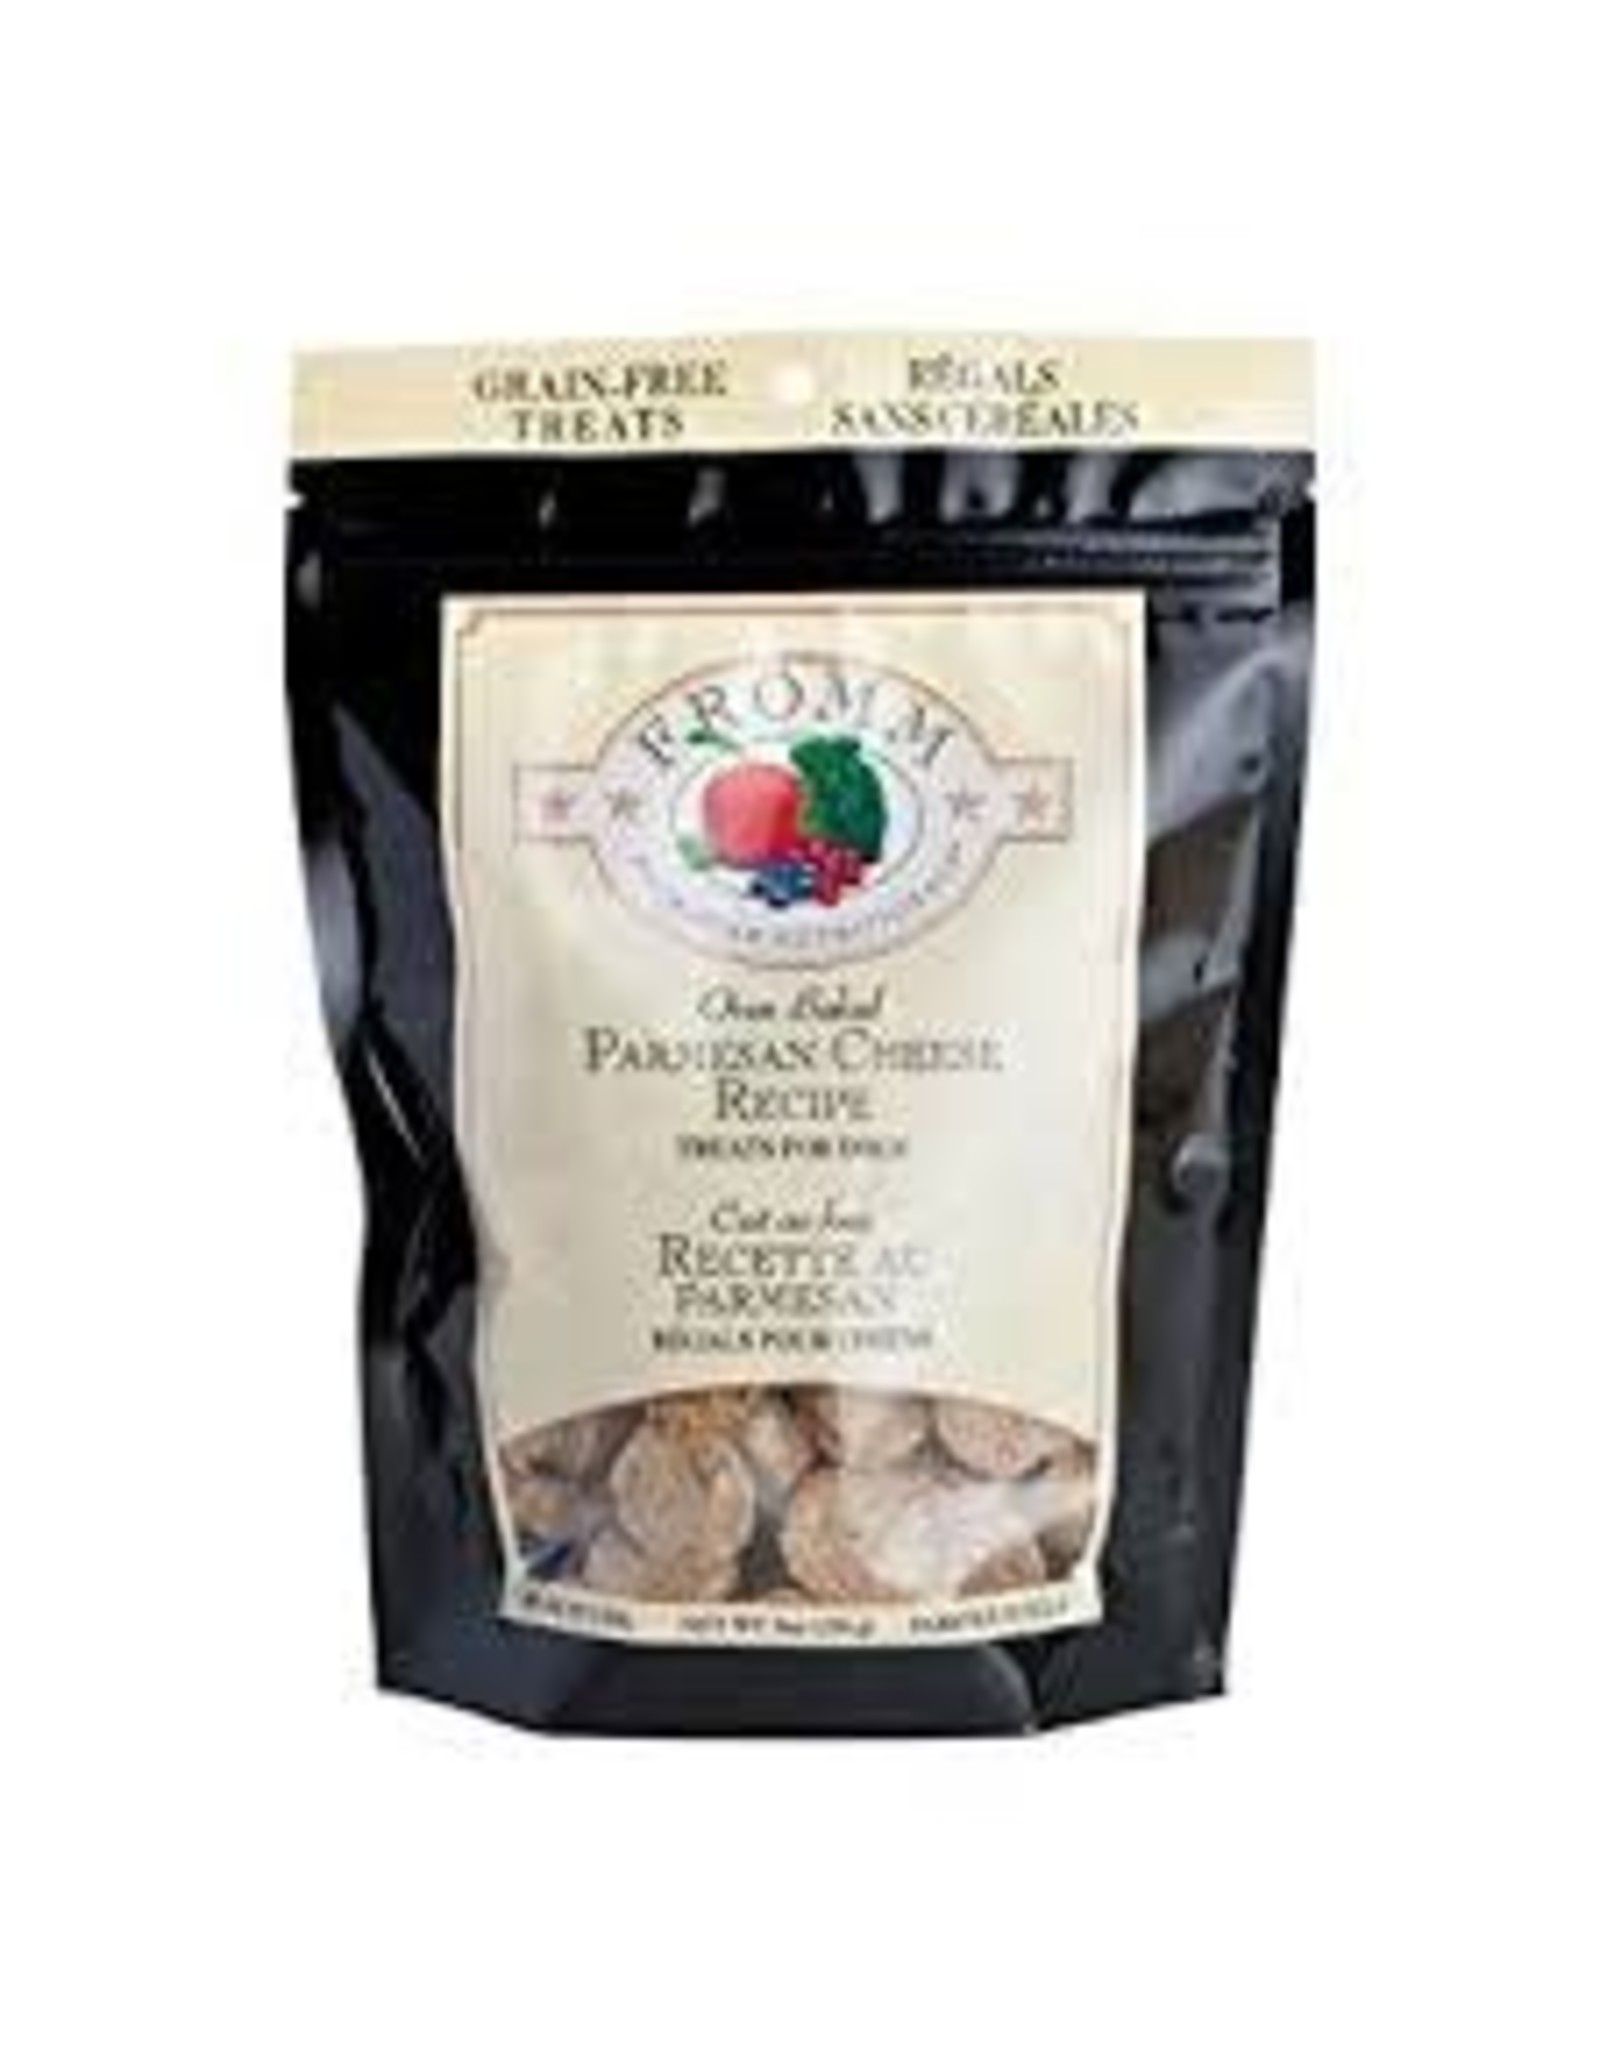 FROMM FROMM PARMESAN CHEESE TREATS 8OZ